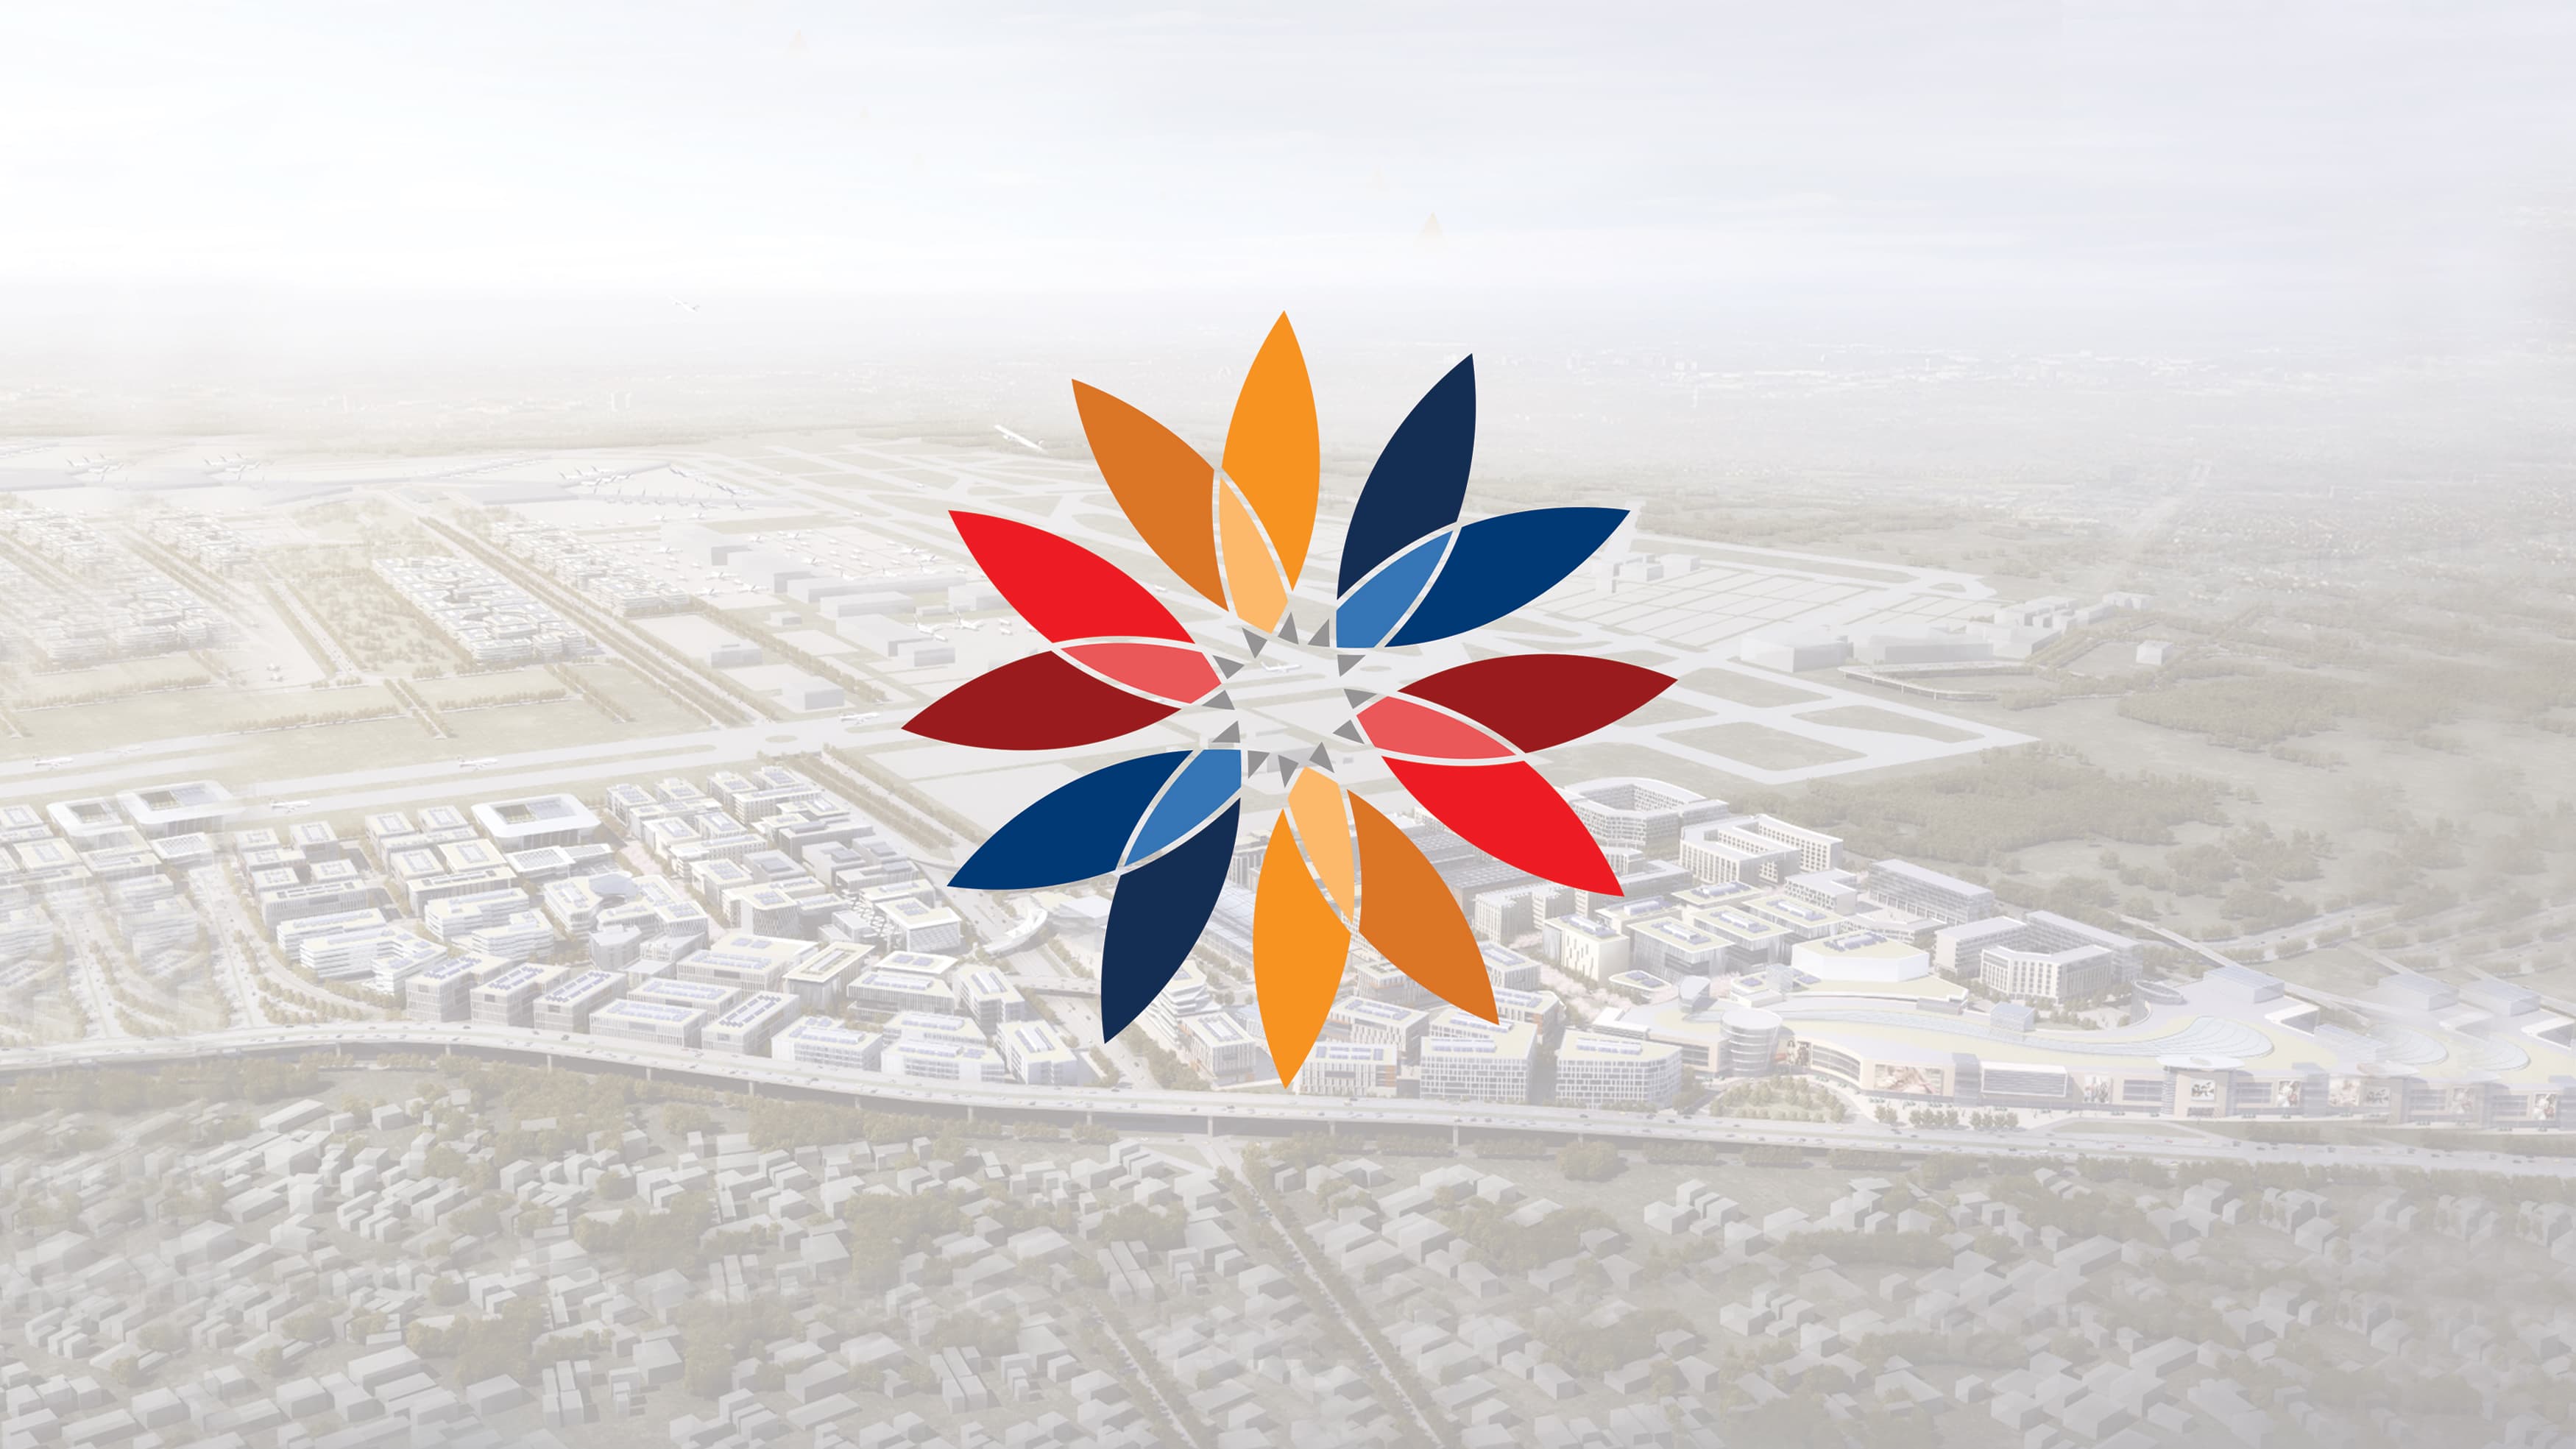 Circular kaleidoscope like logo placed on an aerial image of a city.